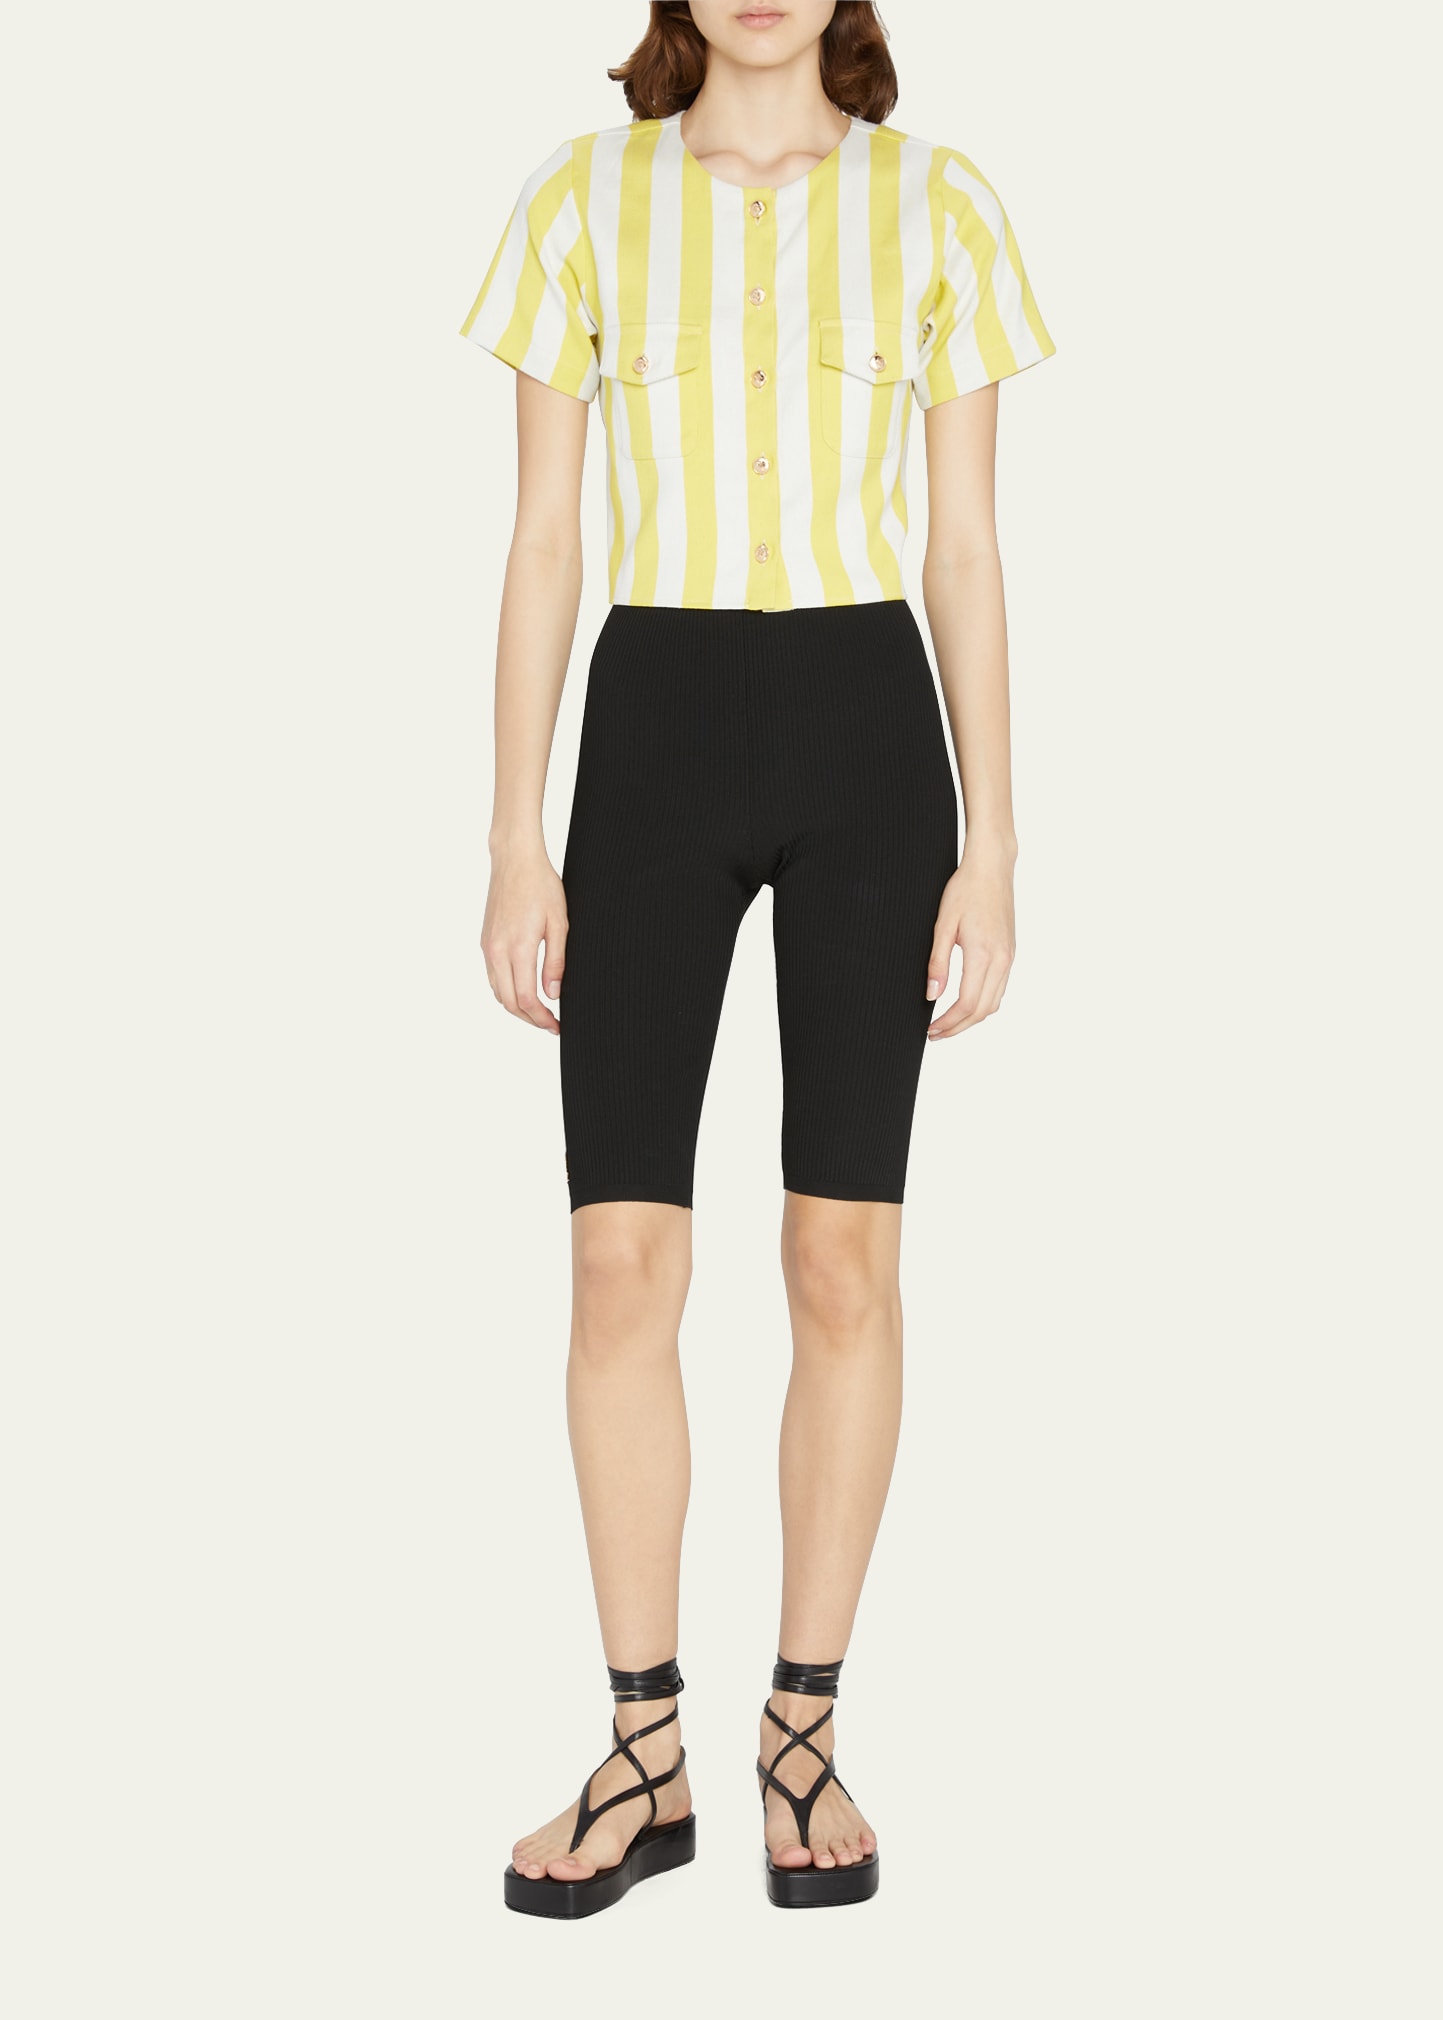 MIGUELINA RINA STRIPED BUTTON-FRONT CROP TOP